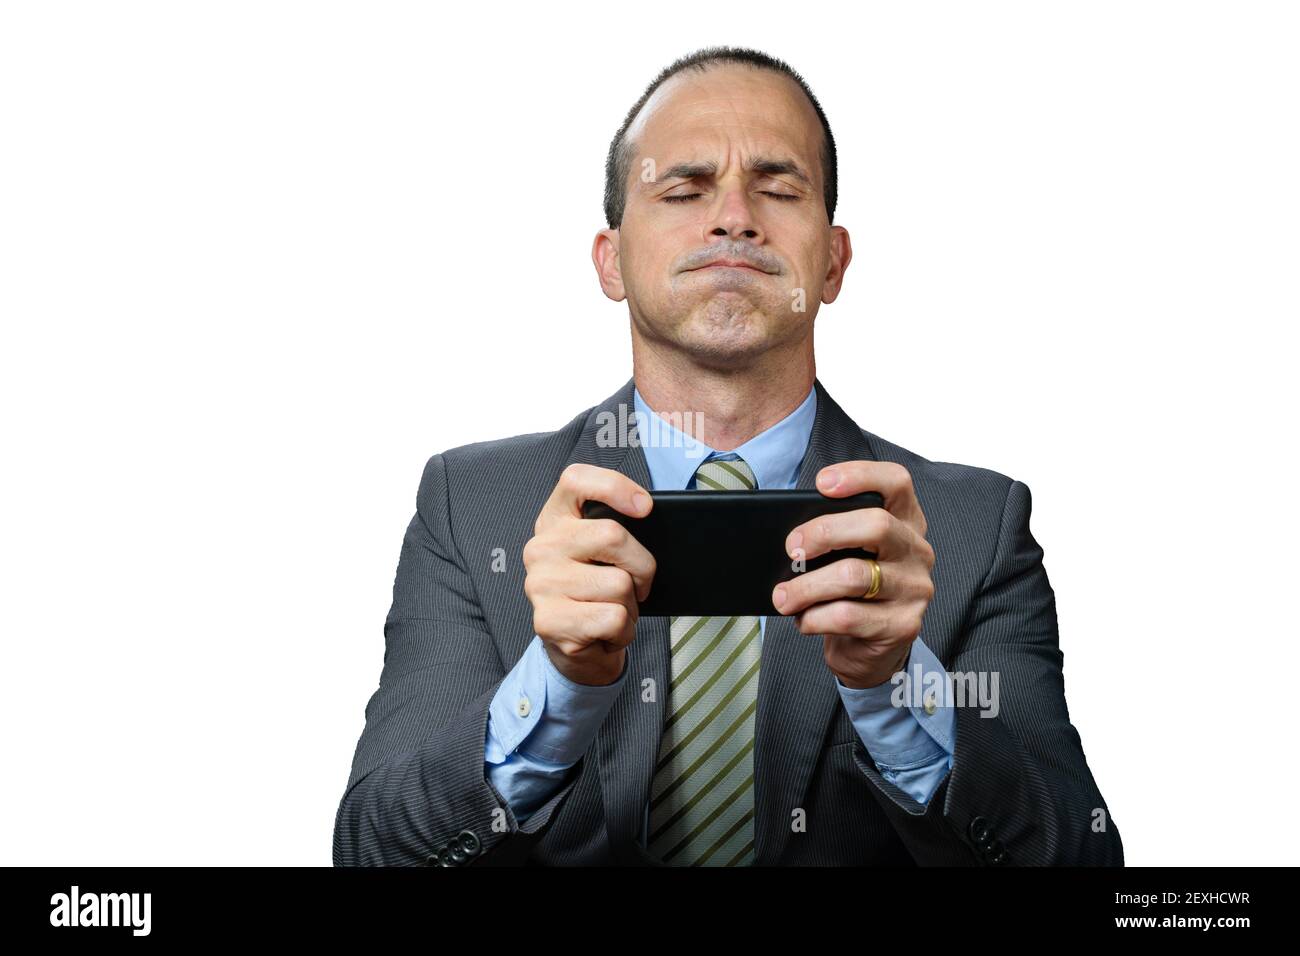 Mature man with suit and tie, holding his smartphone horizontally, breathing out through his nose and with his eyes closed. Stock Photo